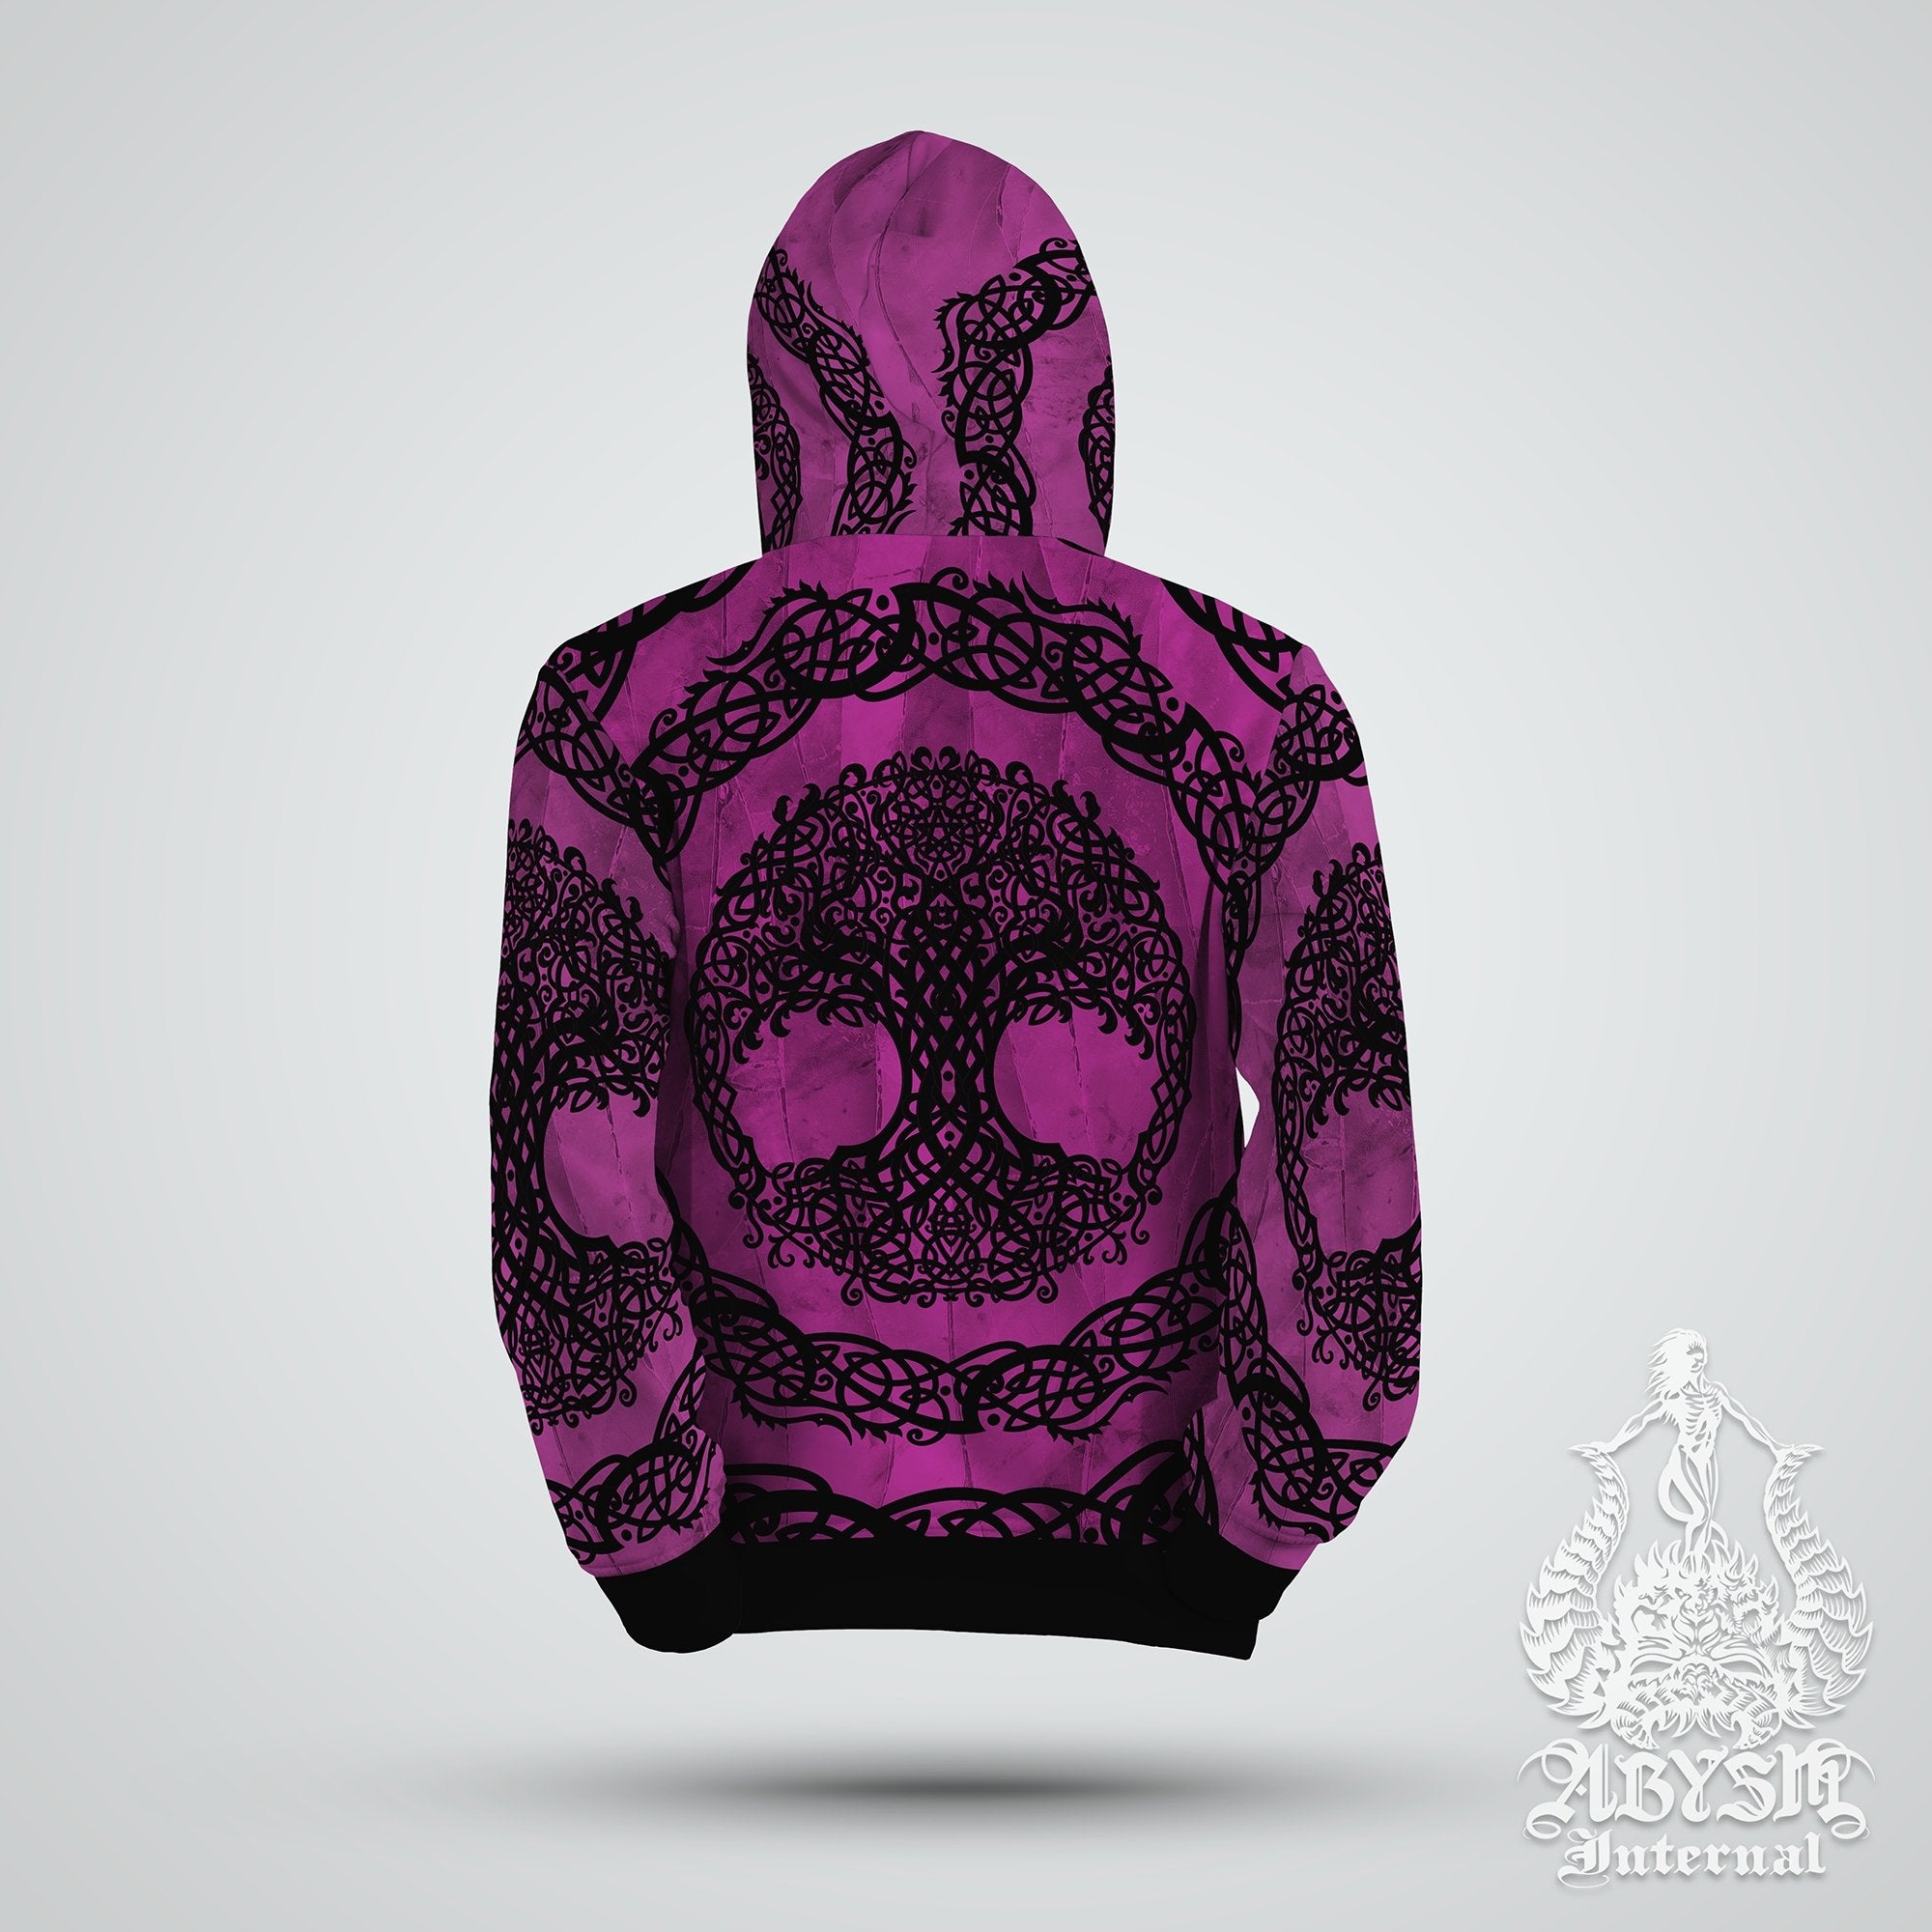 Witchy Hoodie, Wicca Streetwear, Witch Outfit, Pagan Alternative Clothing, Unisex - Pink and Black, Celtic Tree of Life - Abysm Internal